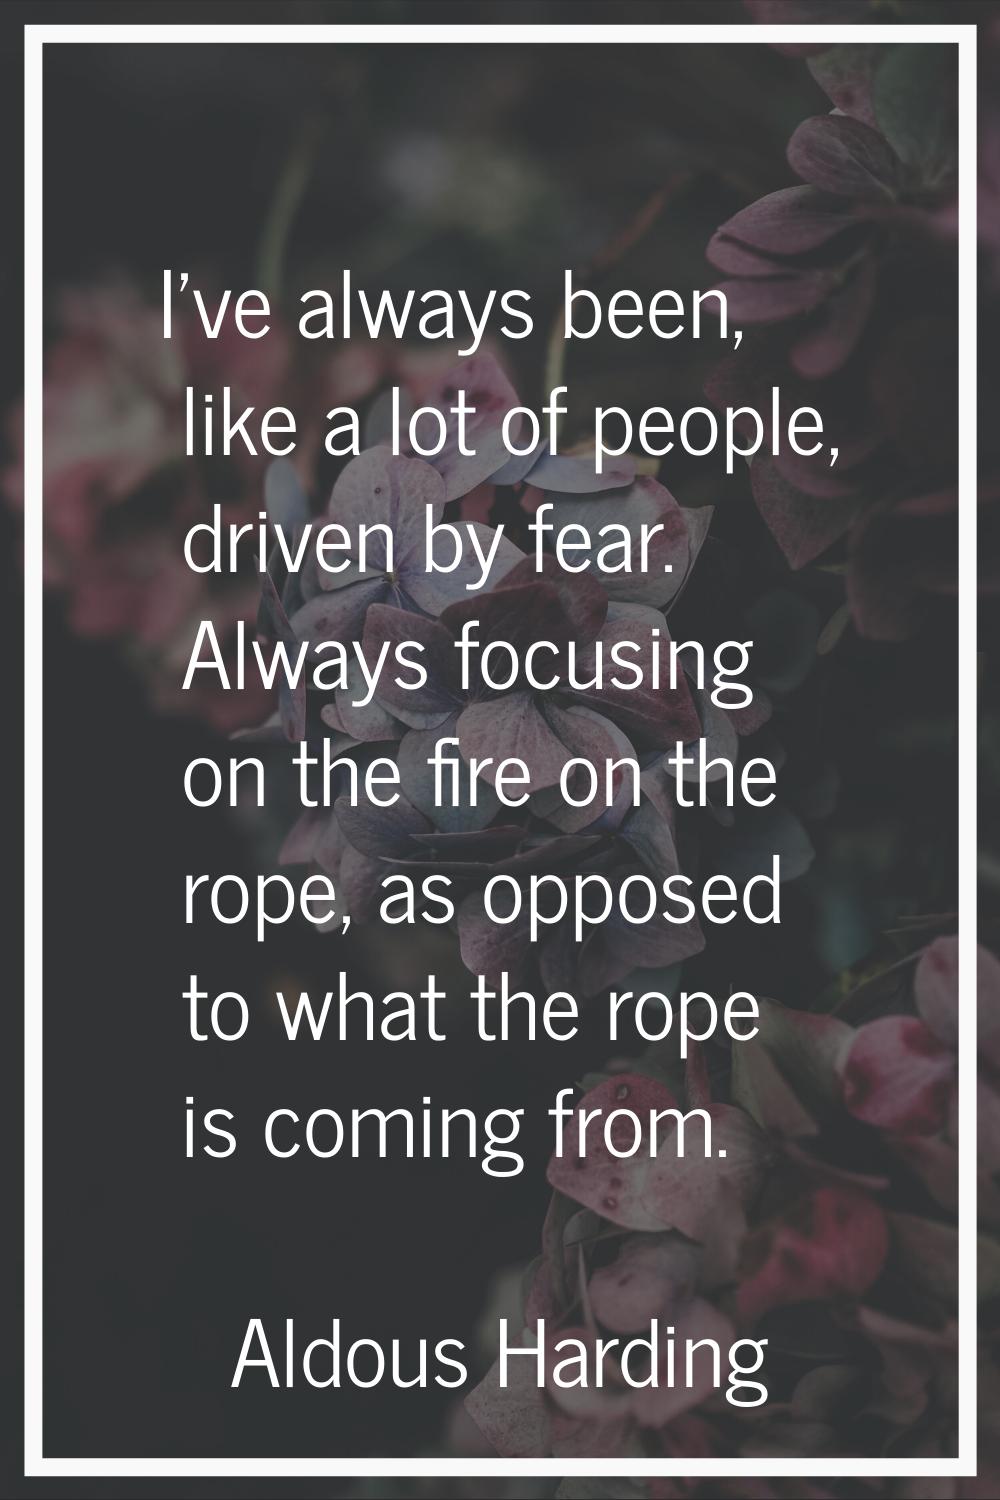 I've always been, like a lot of people, driven by fear. Always focusing on the fire on the rope, as